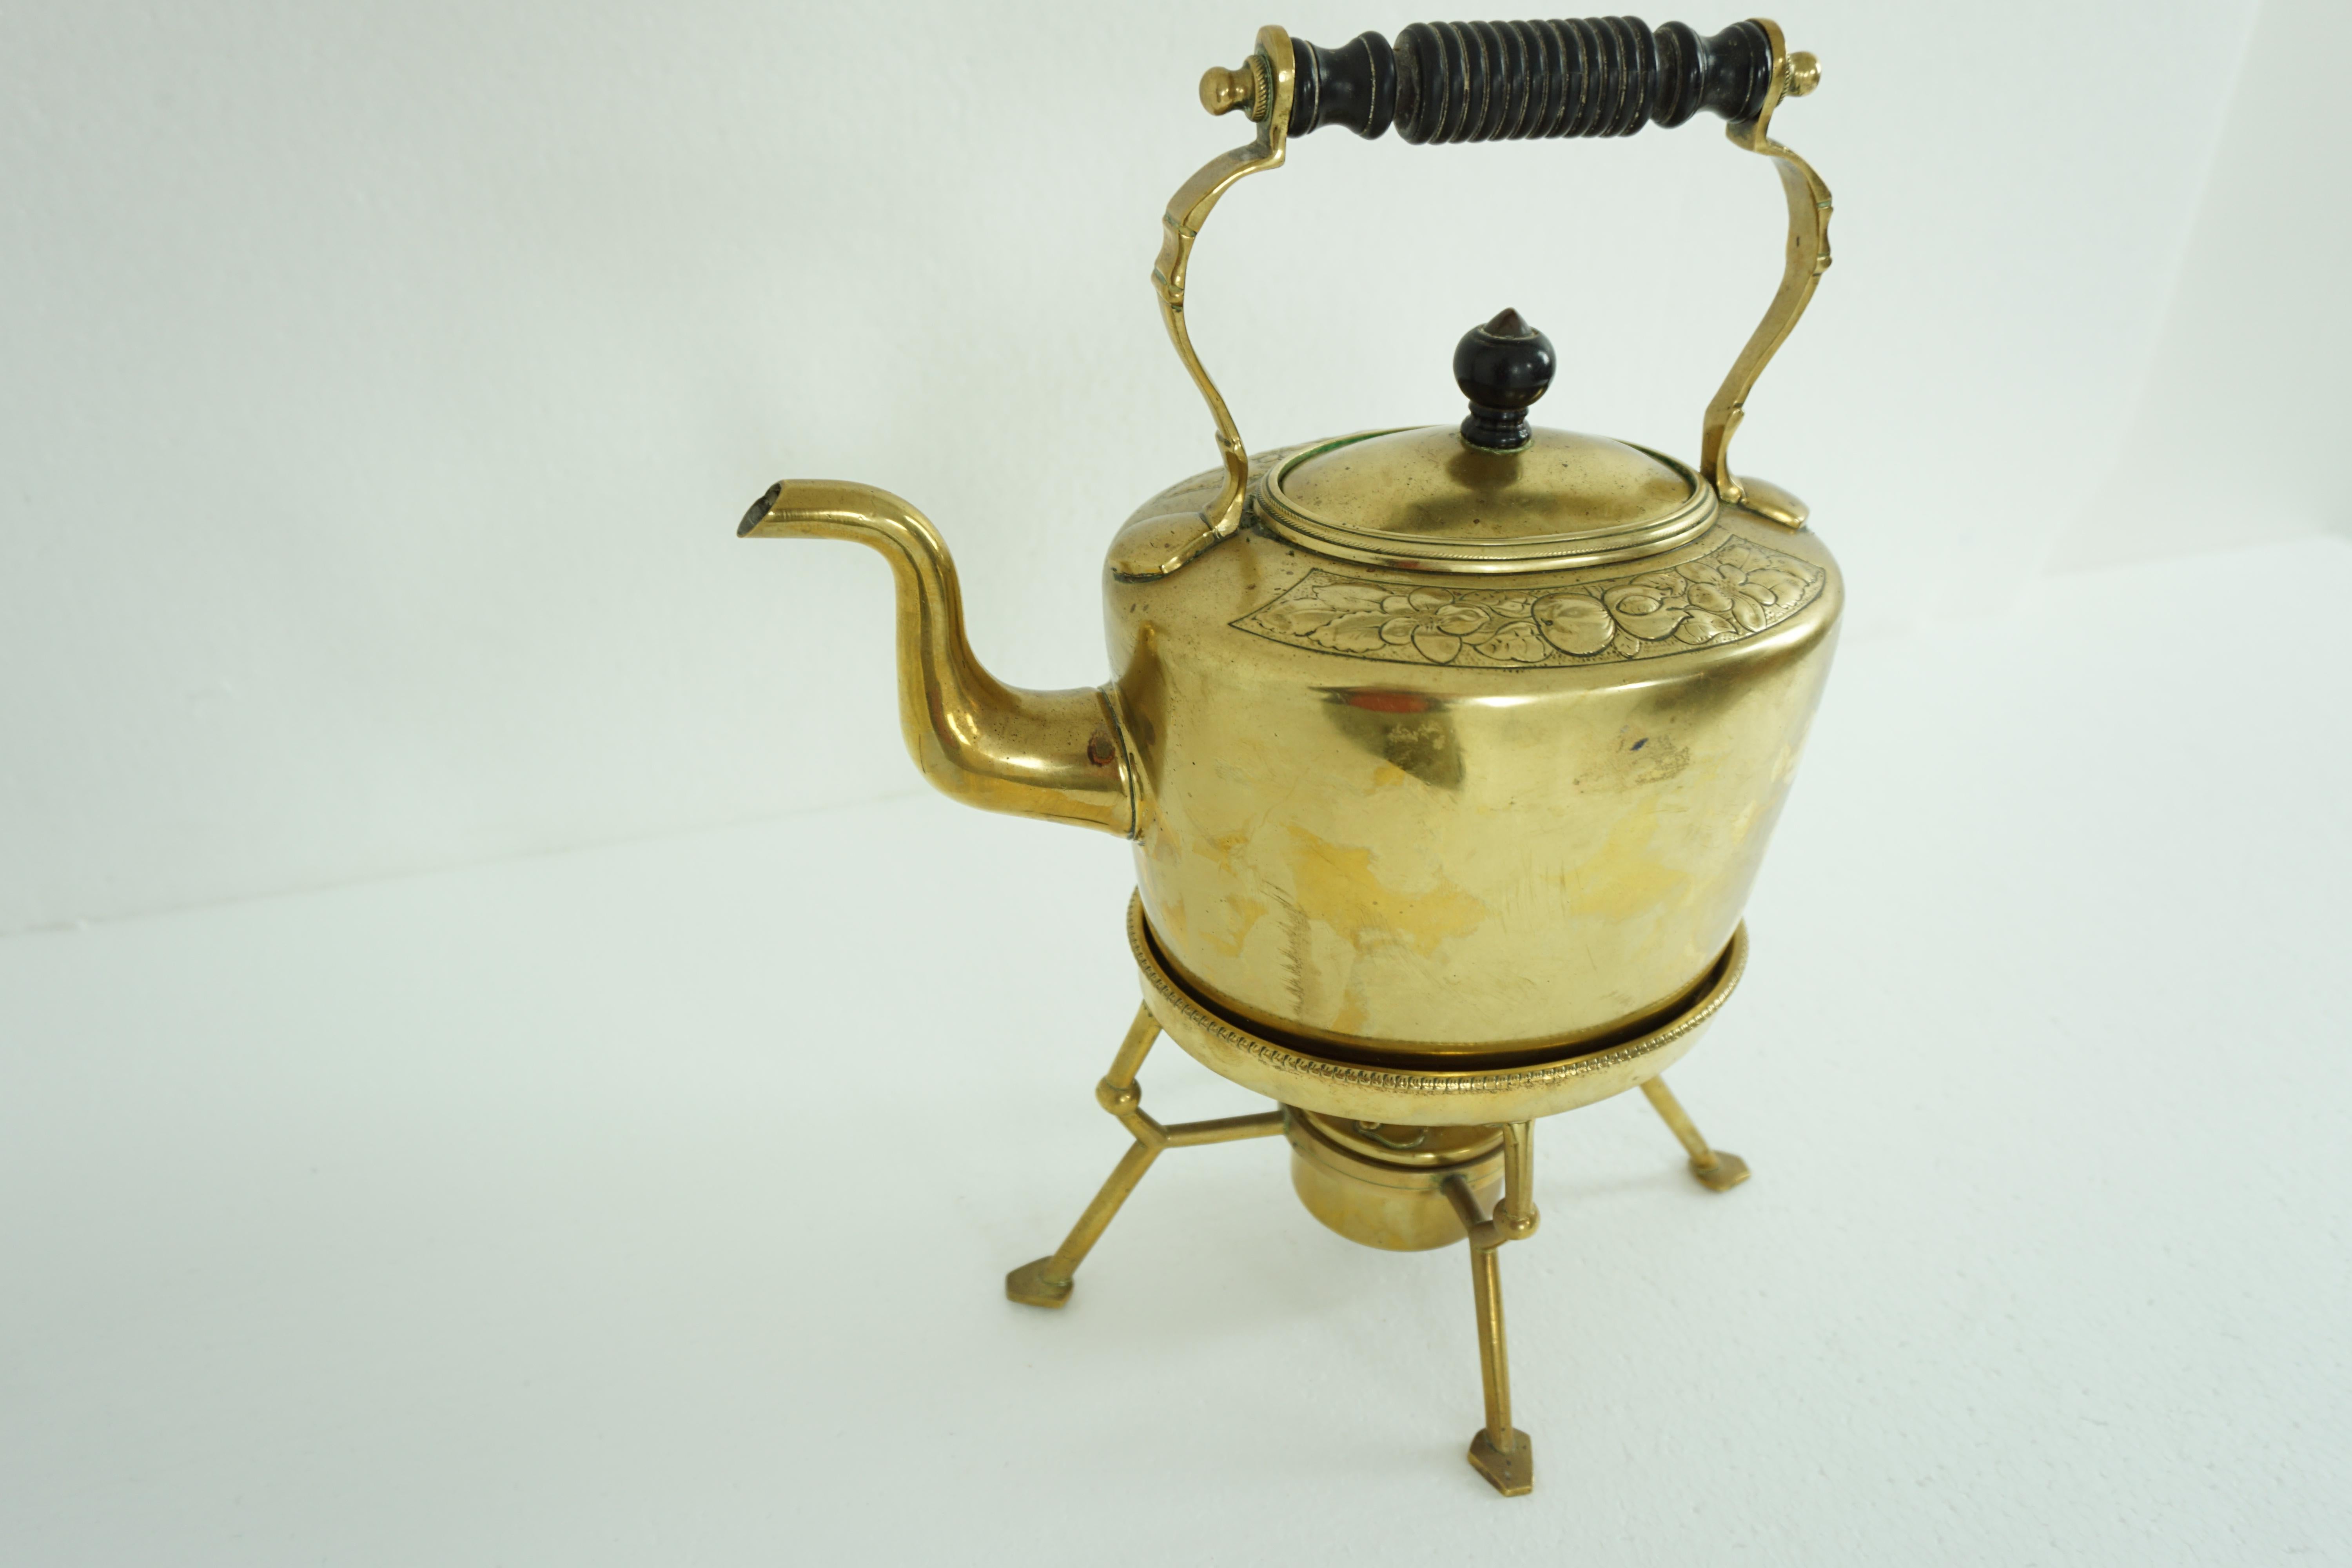 Antique Art Nouveau brass kettle on stand with burner, Scotland 1910 1954

Scotland 

1910
Solid brass
Very good condition
Wooden ladle on top
Lovely chisel Art Nouveau
Decoration around the edge
Lift up lid
Kettle sits on four-legged